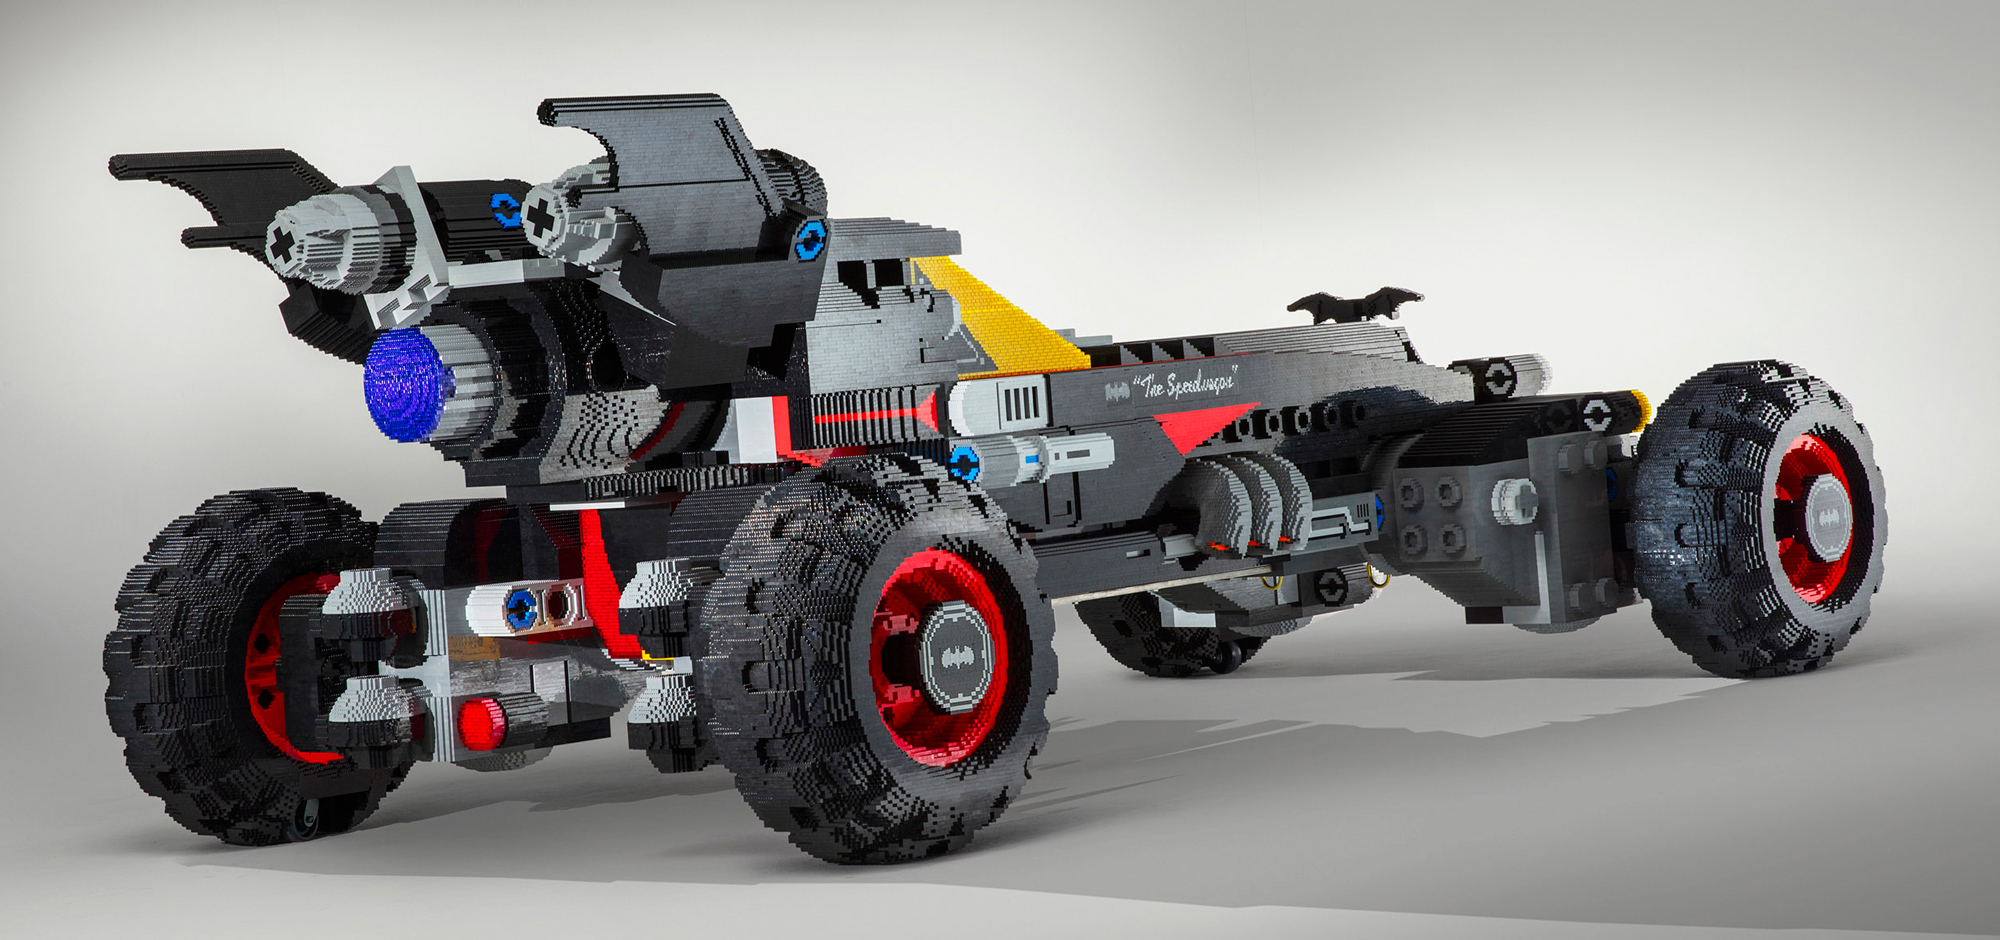 We’d Like This Life-Sized Version Of Lego Batman’s Batmobile To Be An Official Set Immediately, Please